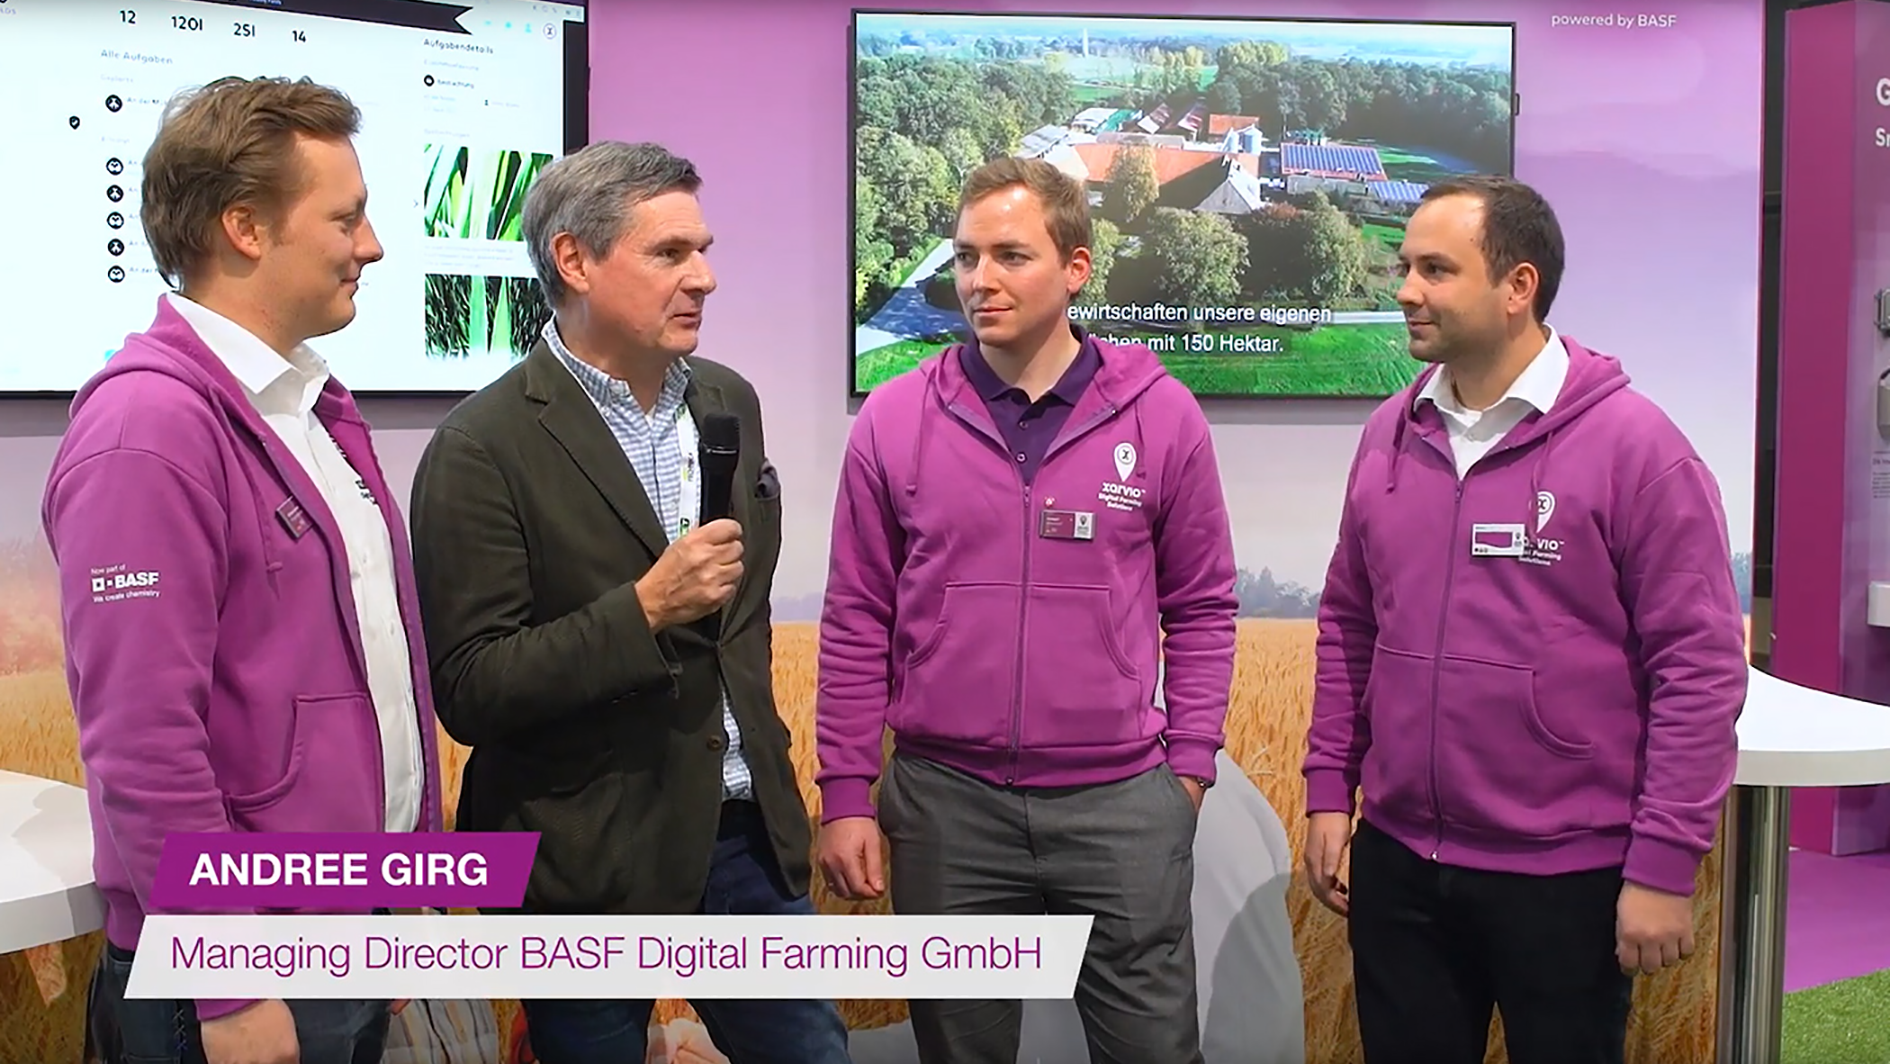 xarvio at Agritechnica 2019 - Evaluation interview